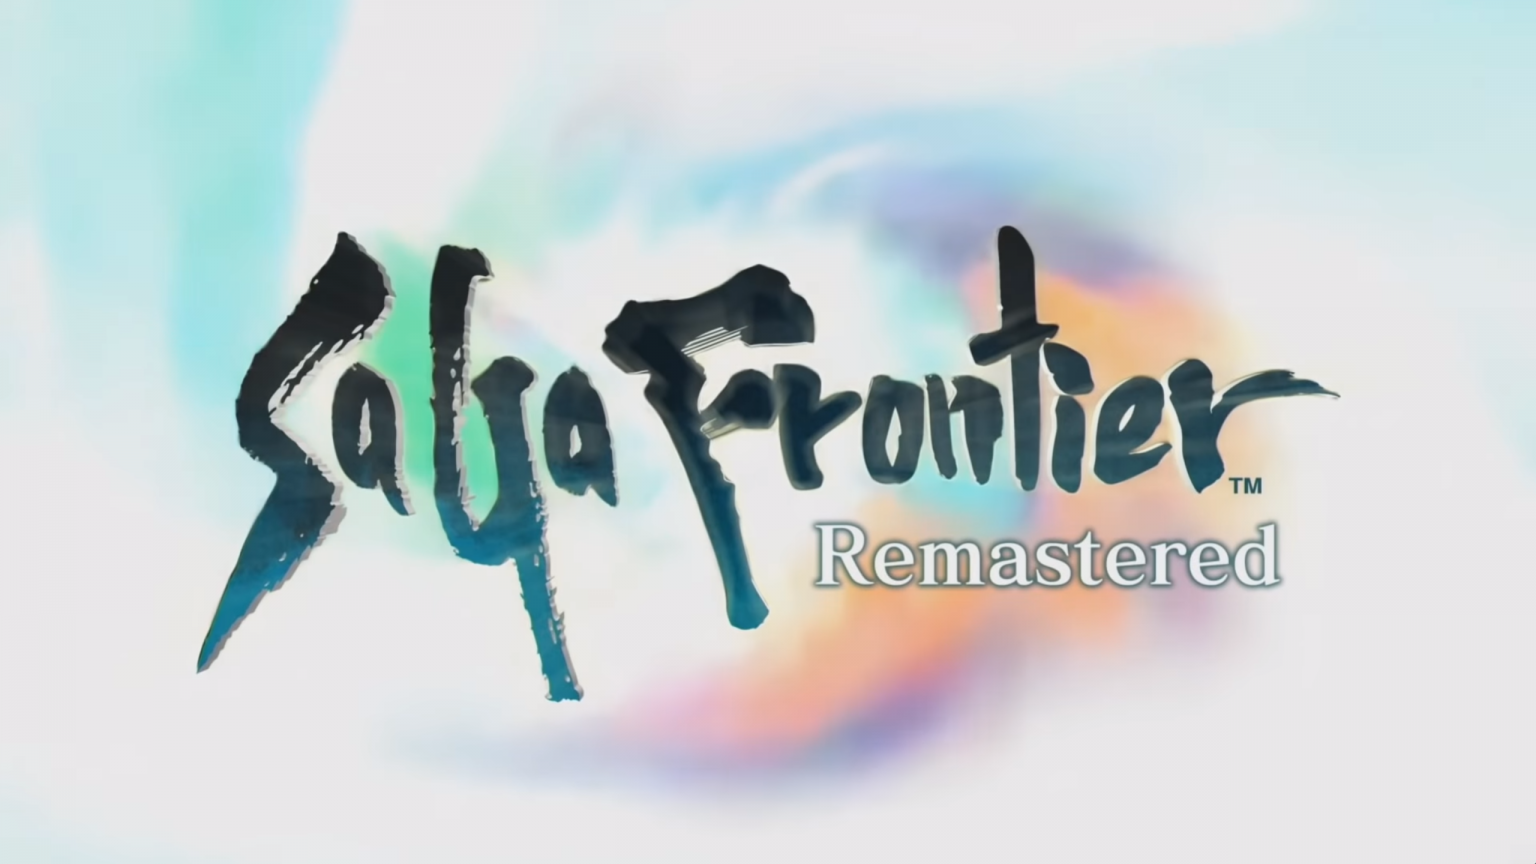 saga frontier remastered additional content